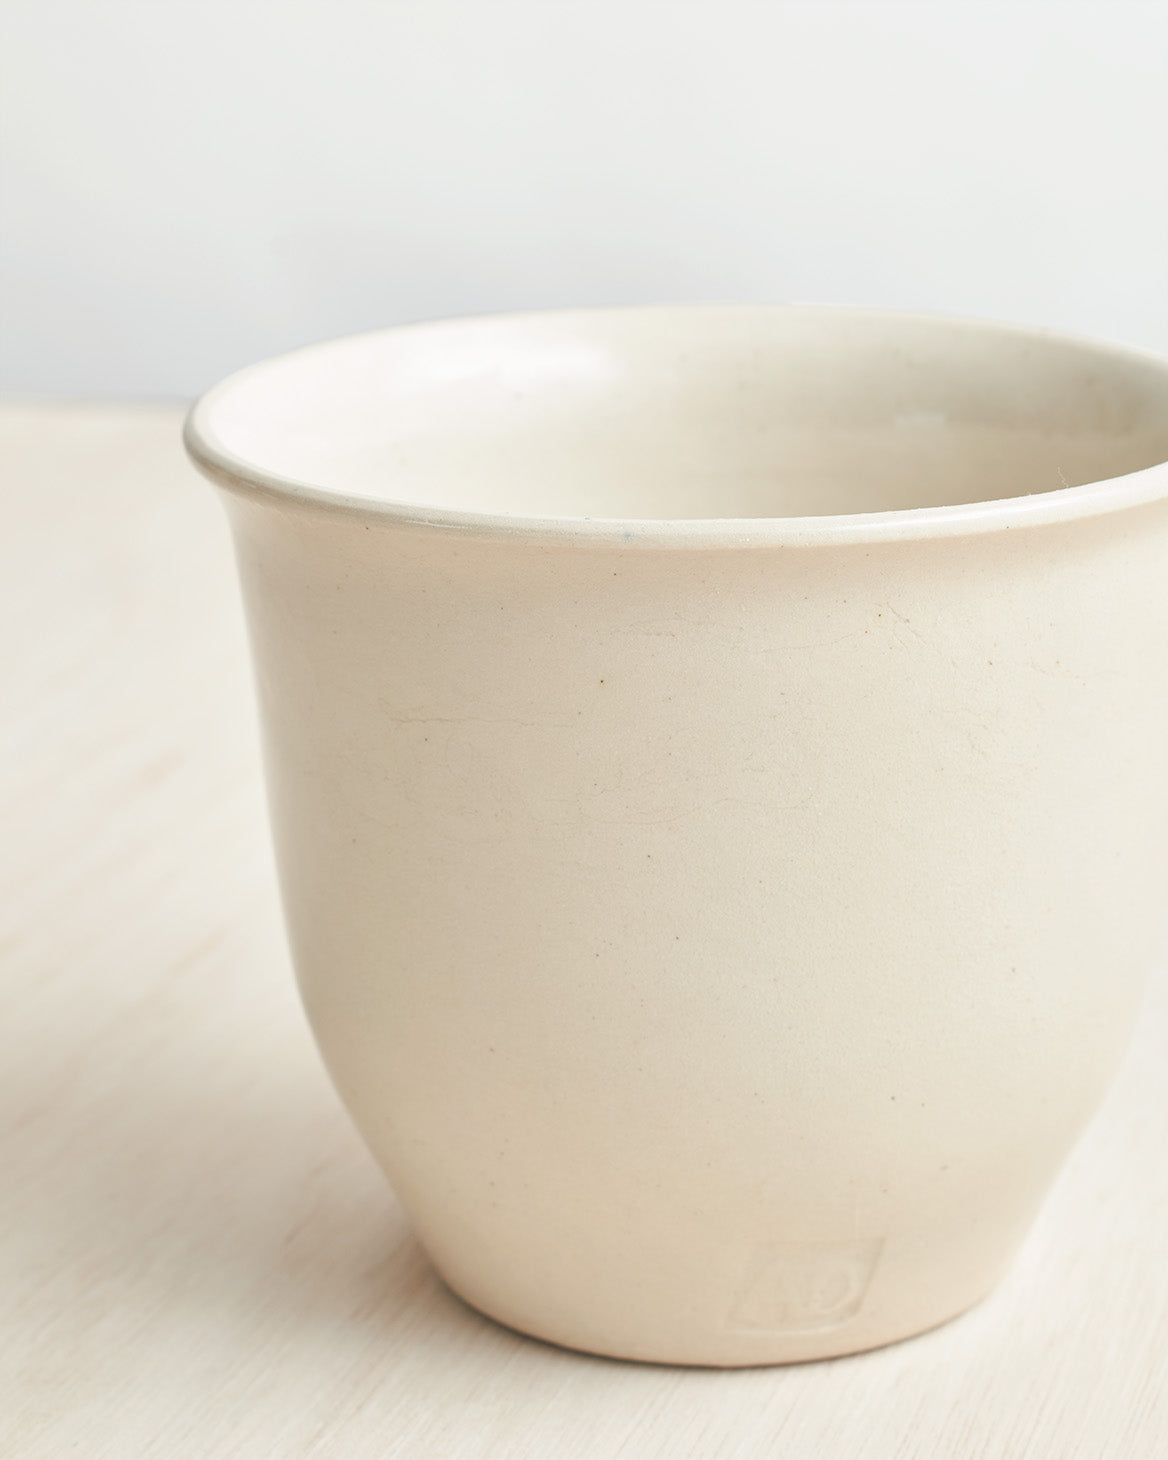 Handleless Stoneware Cup in Natural Glaze